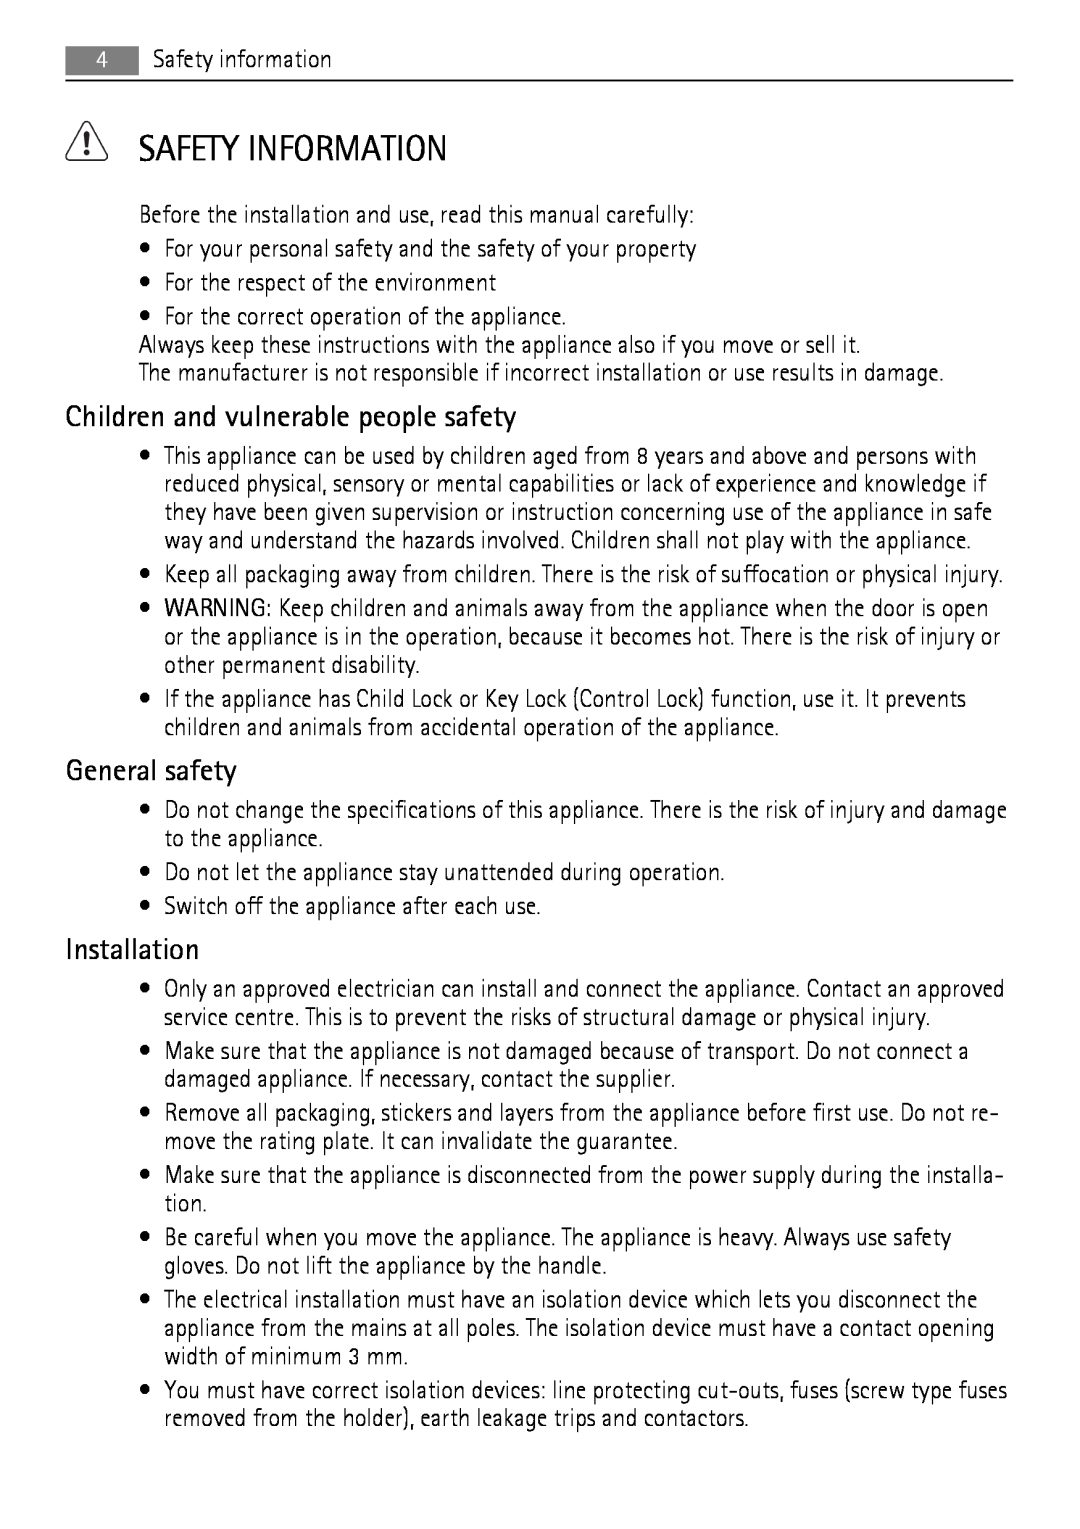 AEG BE3013021 user manual Safety Information, Children and vulnerable people safety, General safety, Installation 